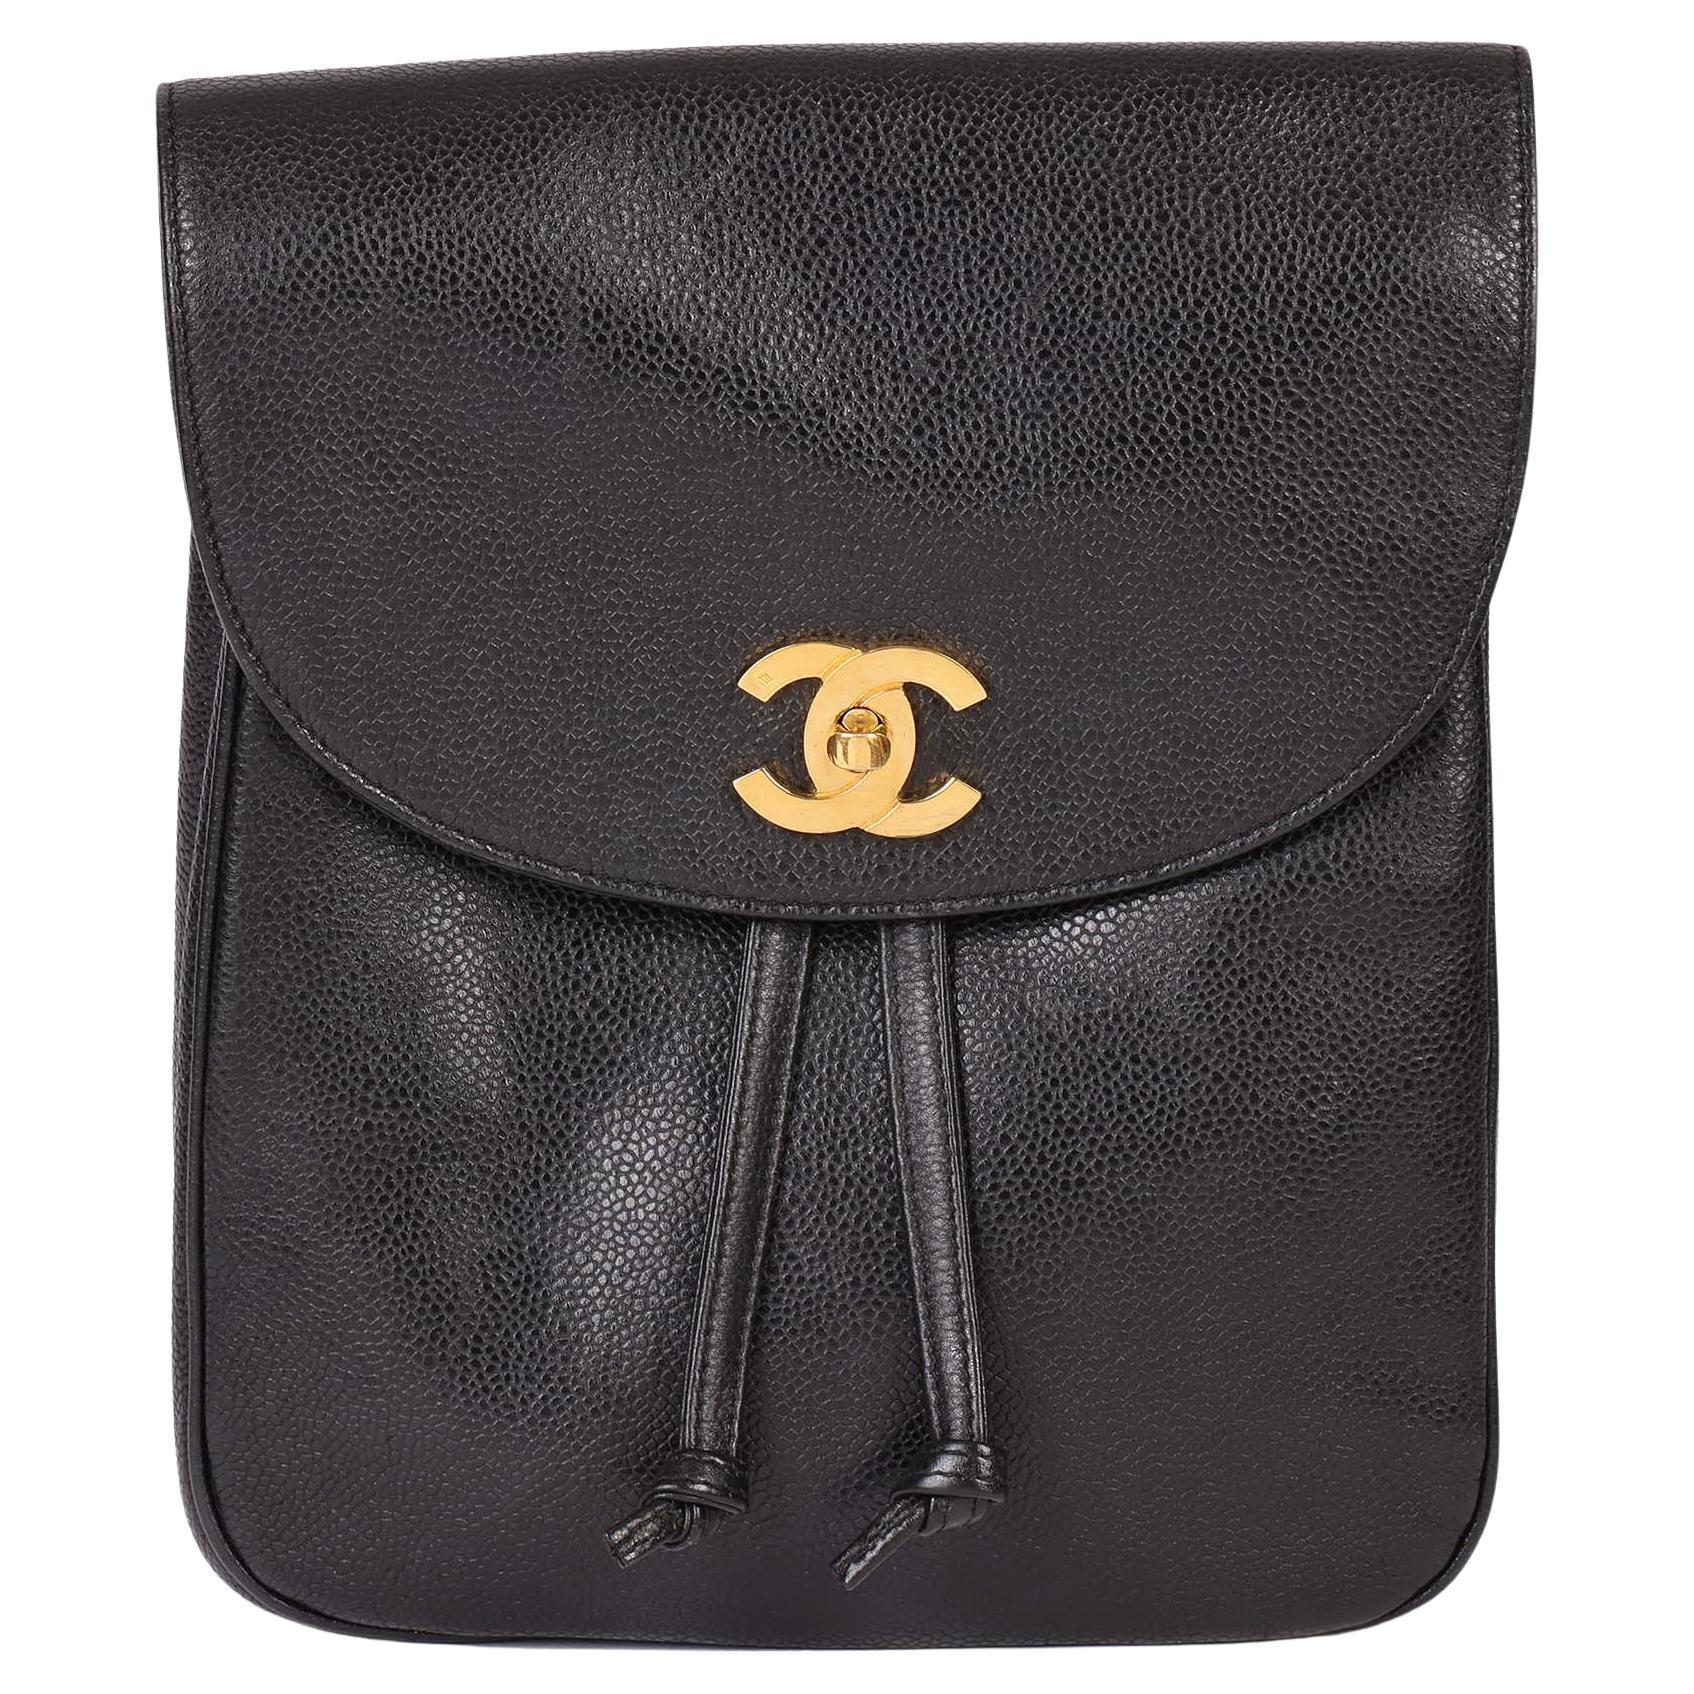 CHANEL Black Caviar Leather Vintage Classic Backpack